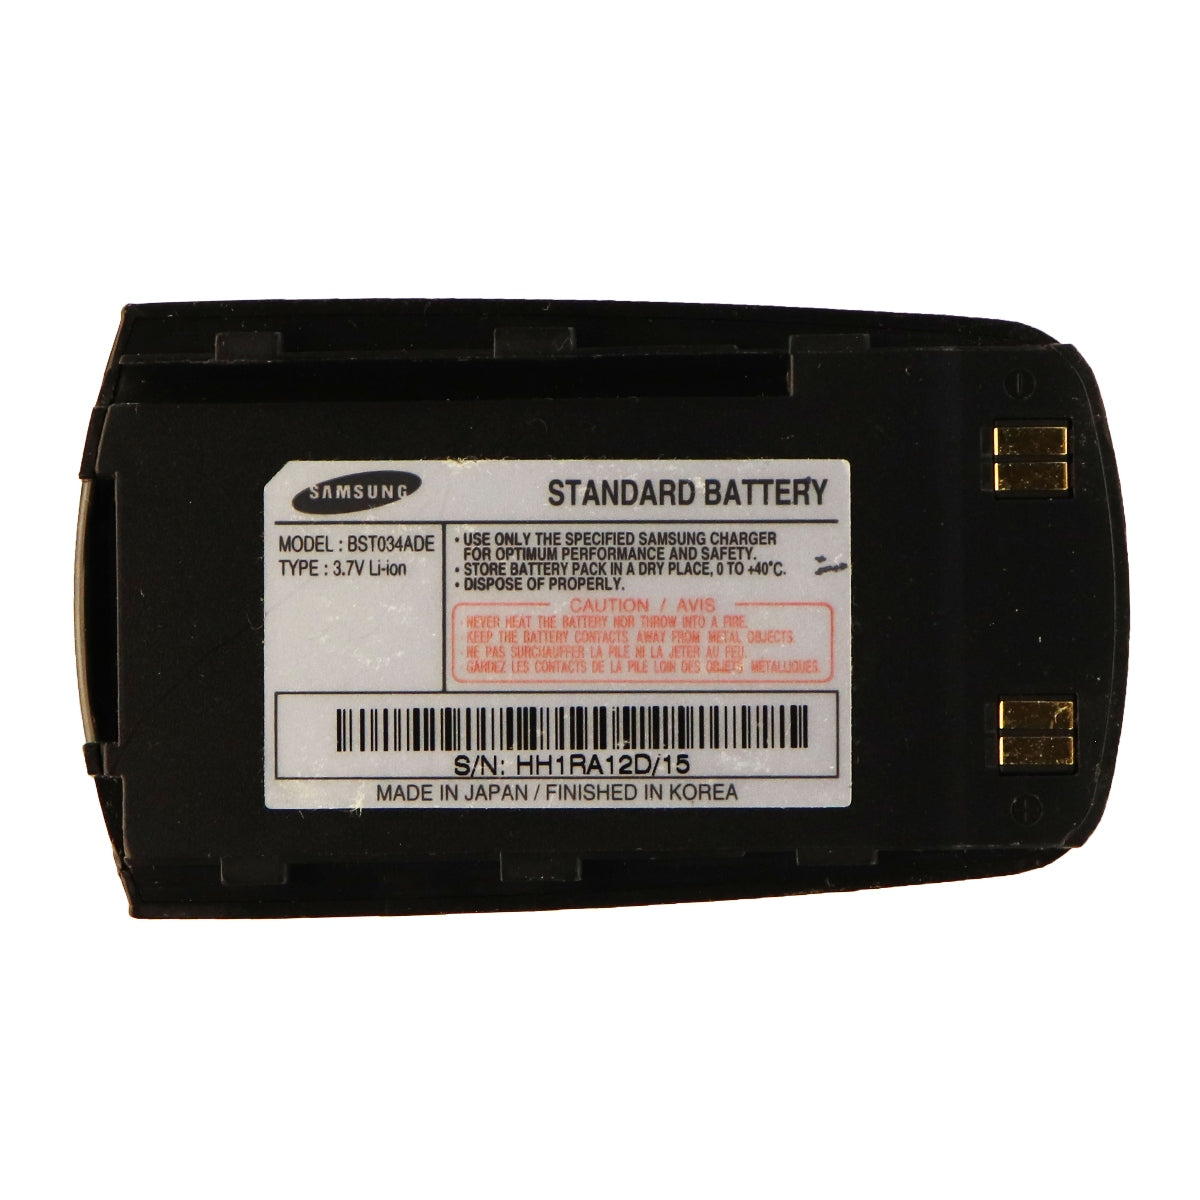 OEM Samsung Standard Li-ion Battery BST034ADE 3.7V for Samsung SPH-N200 - Samsung - Simple Cell Shop, Free shipping from Maryland!